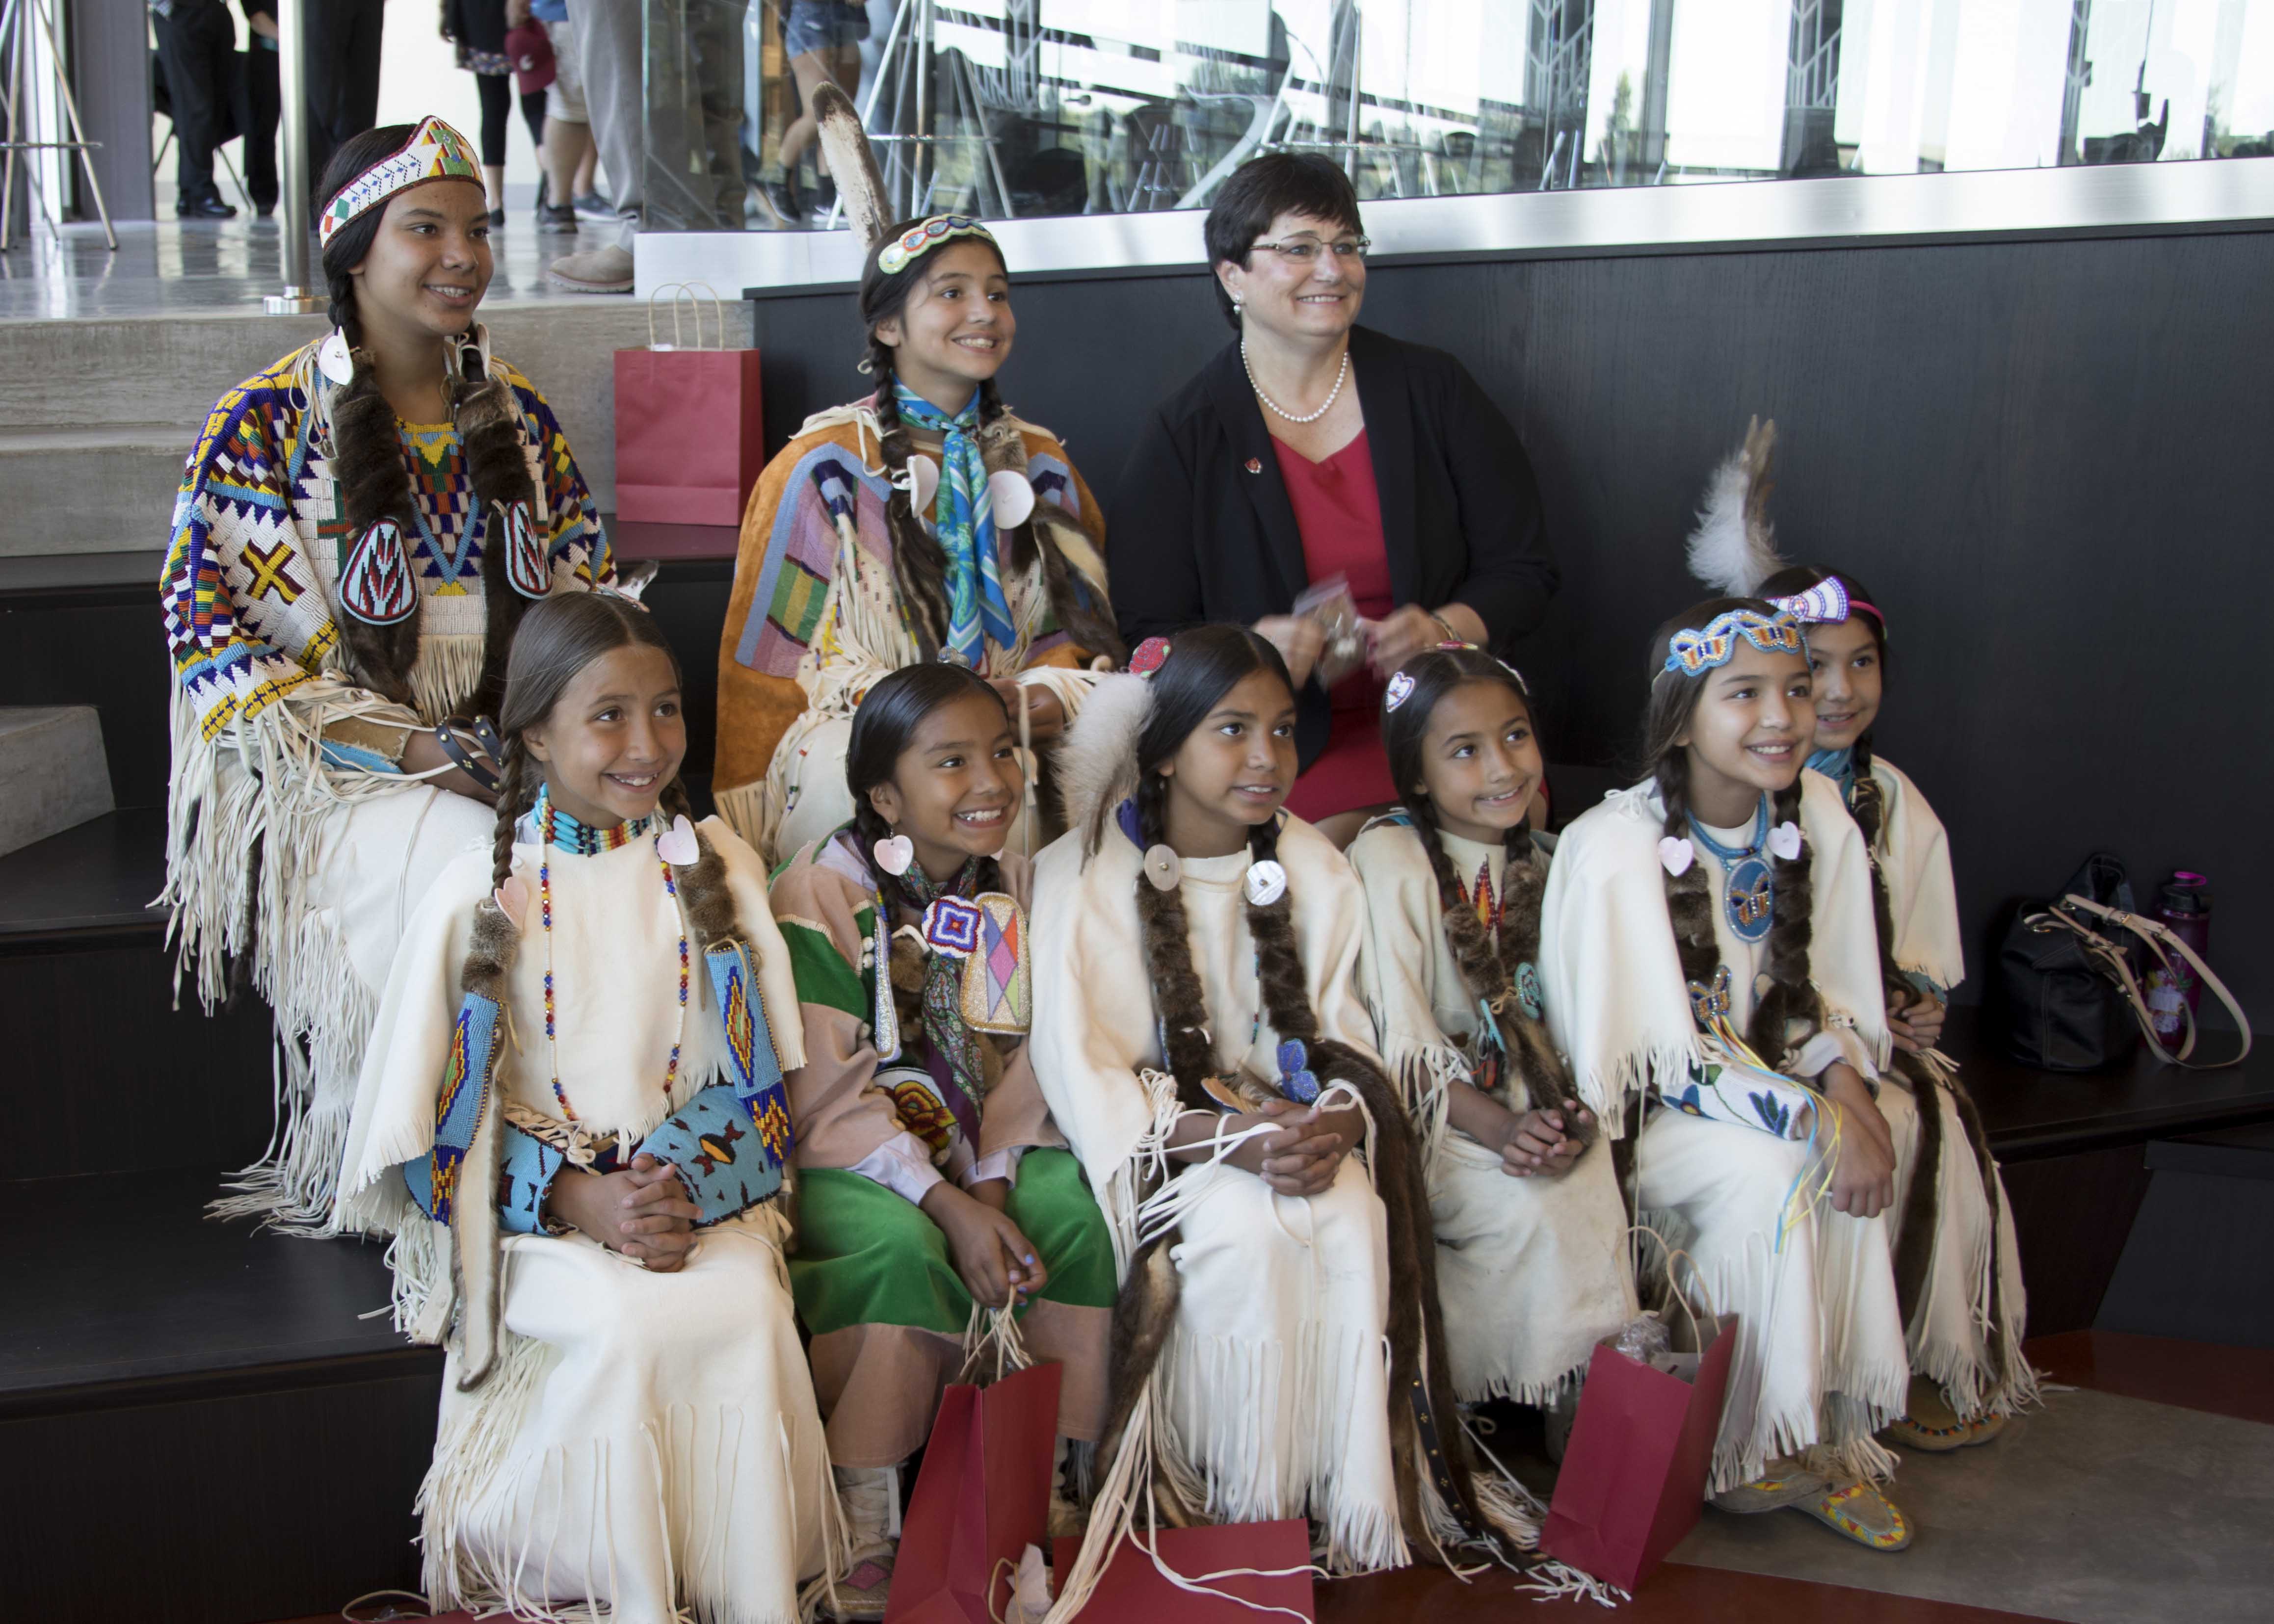 First Lady Noel Schulz seated with young female dancers.